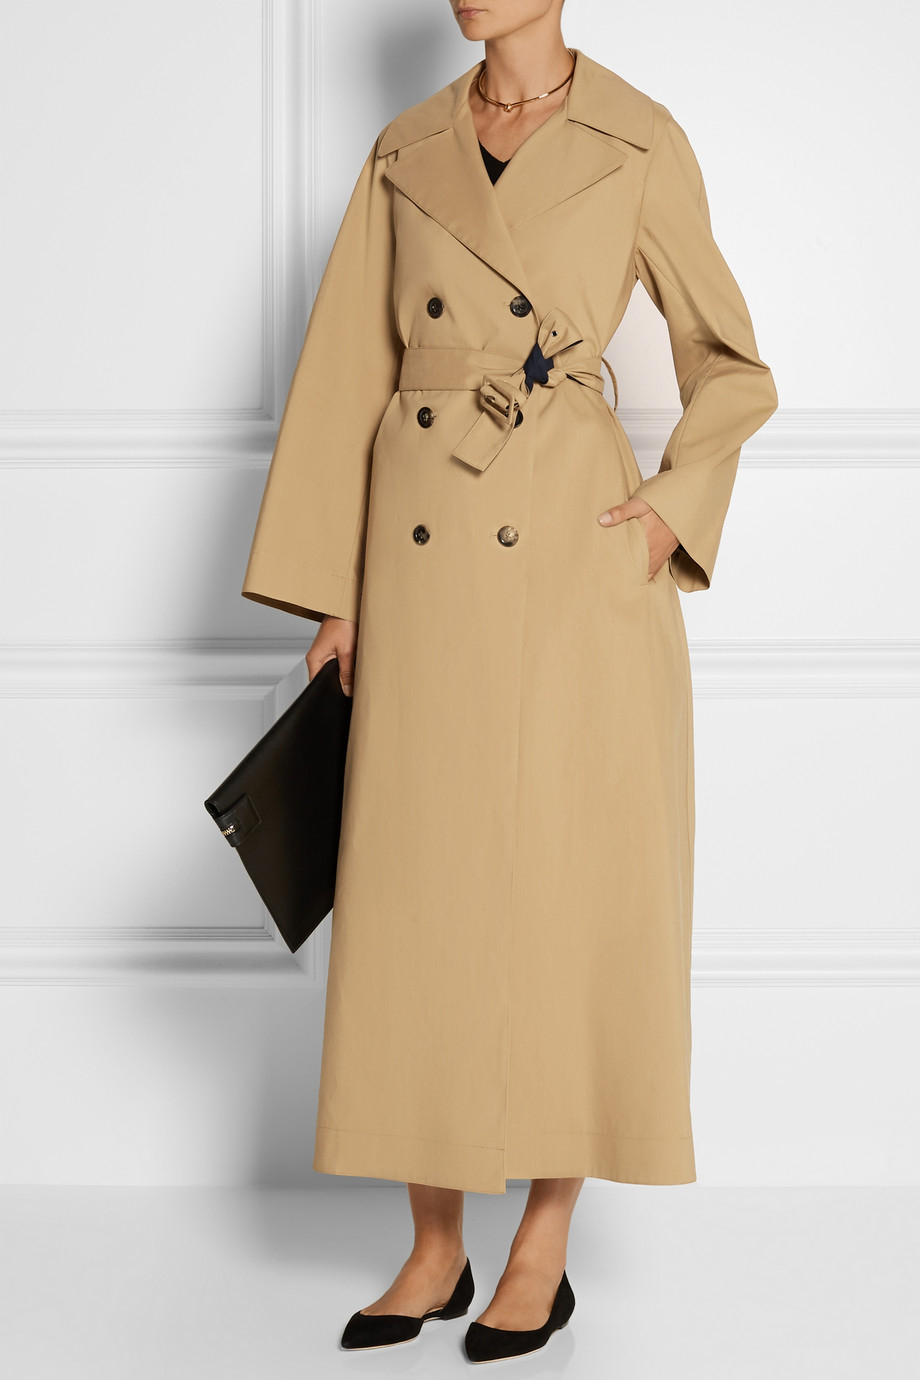 The Row Guyen Doublefaced Cotton Trench Coat in Blue (Natural) - Lyst